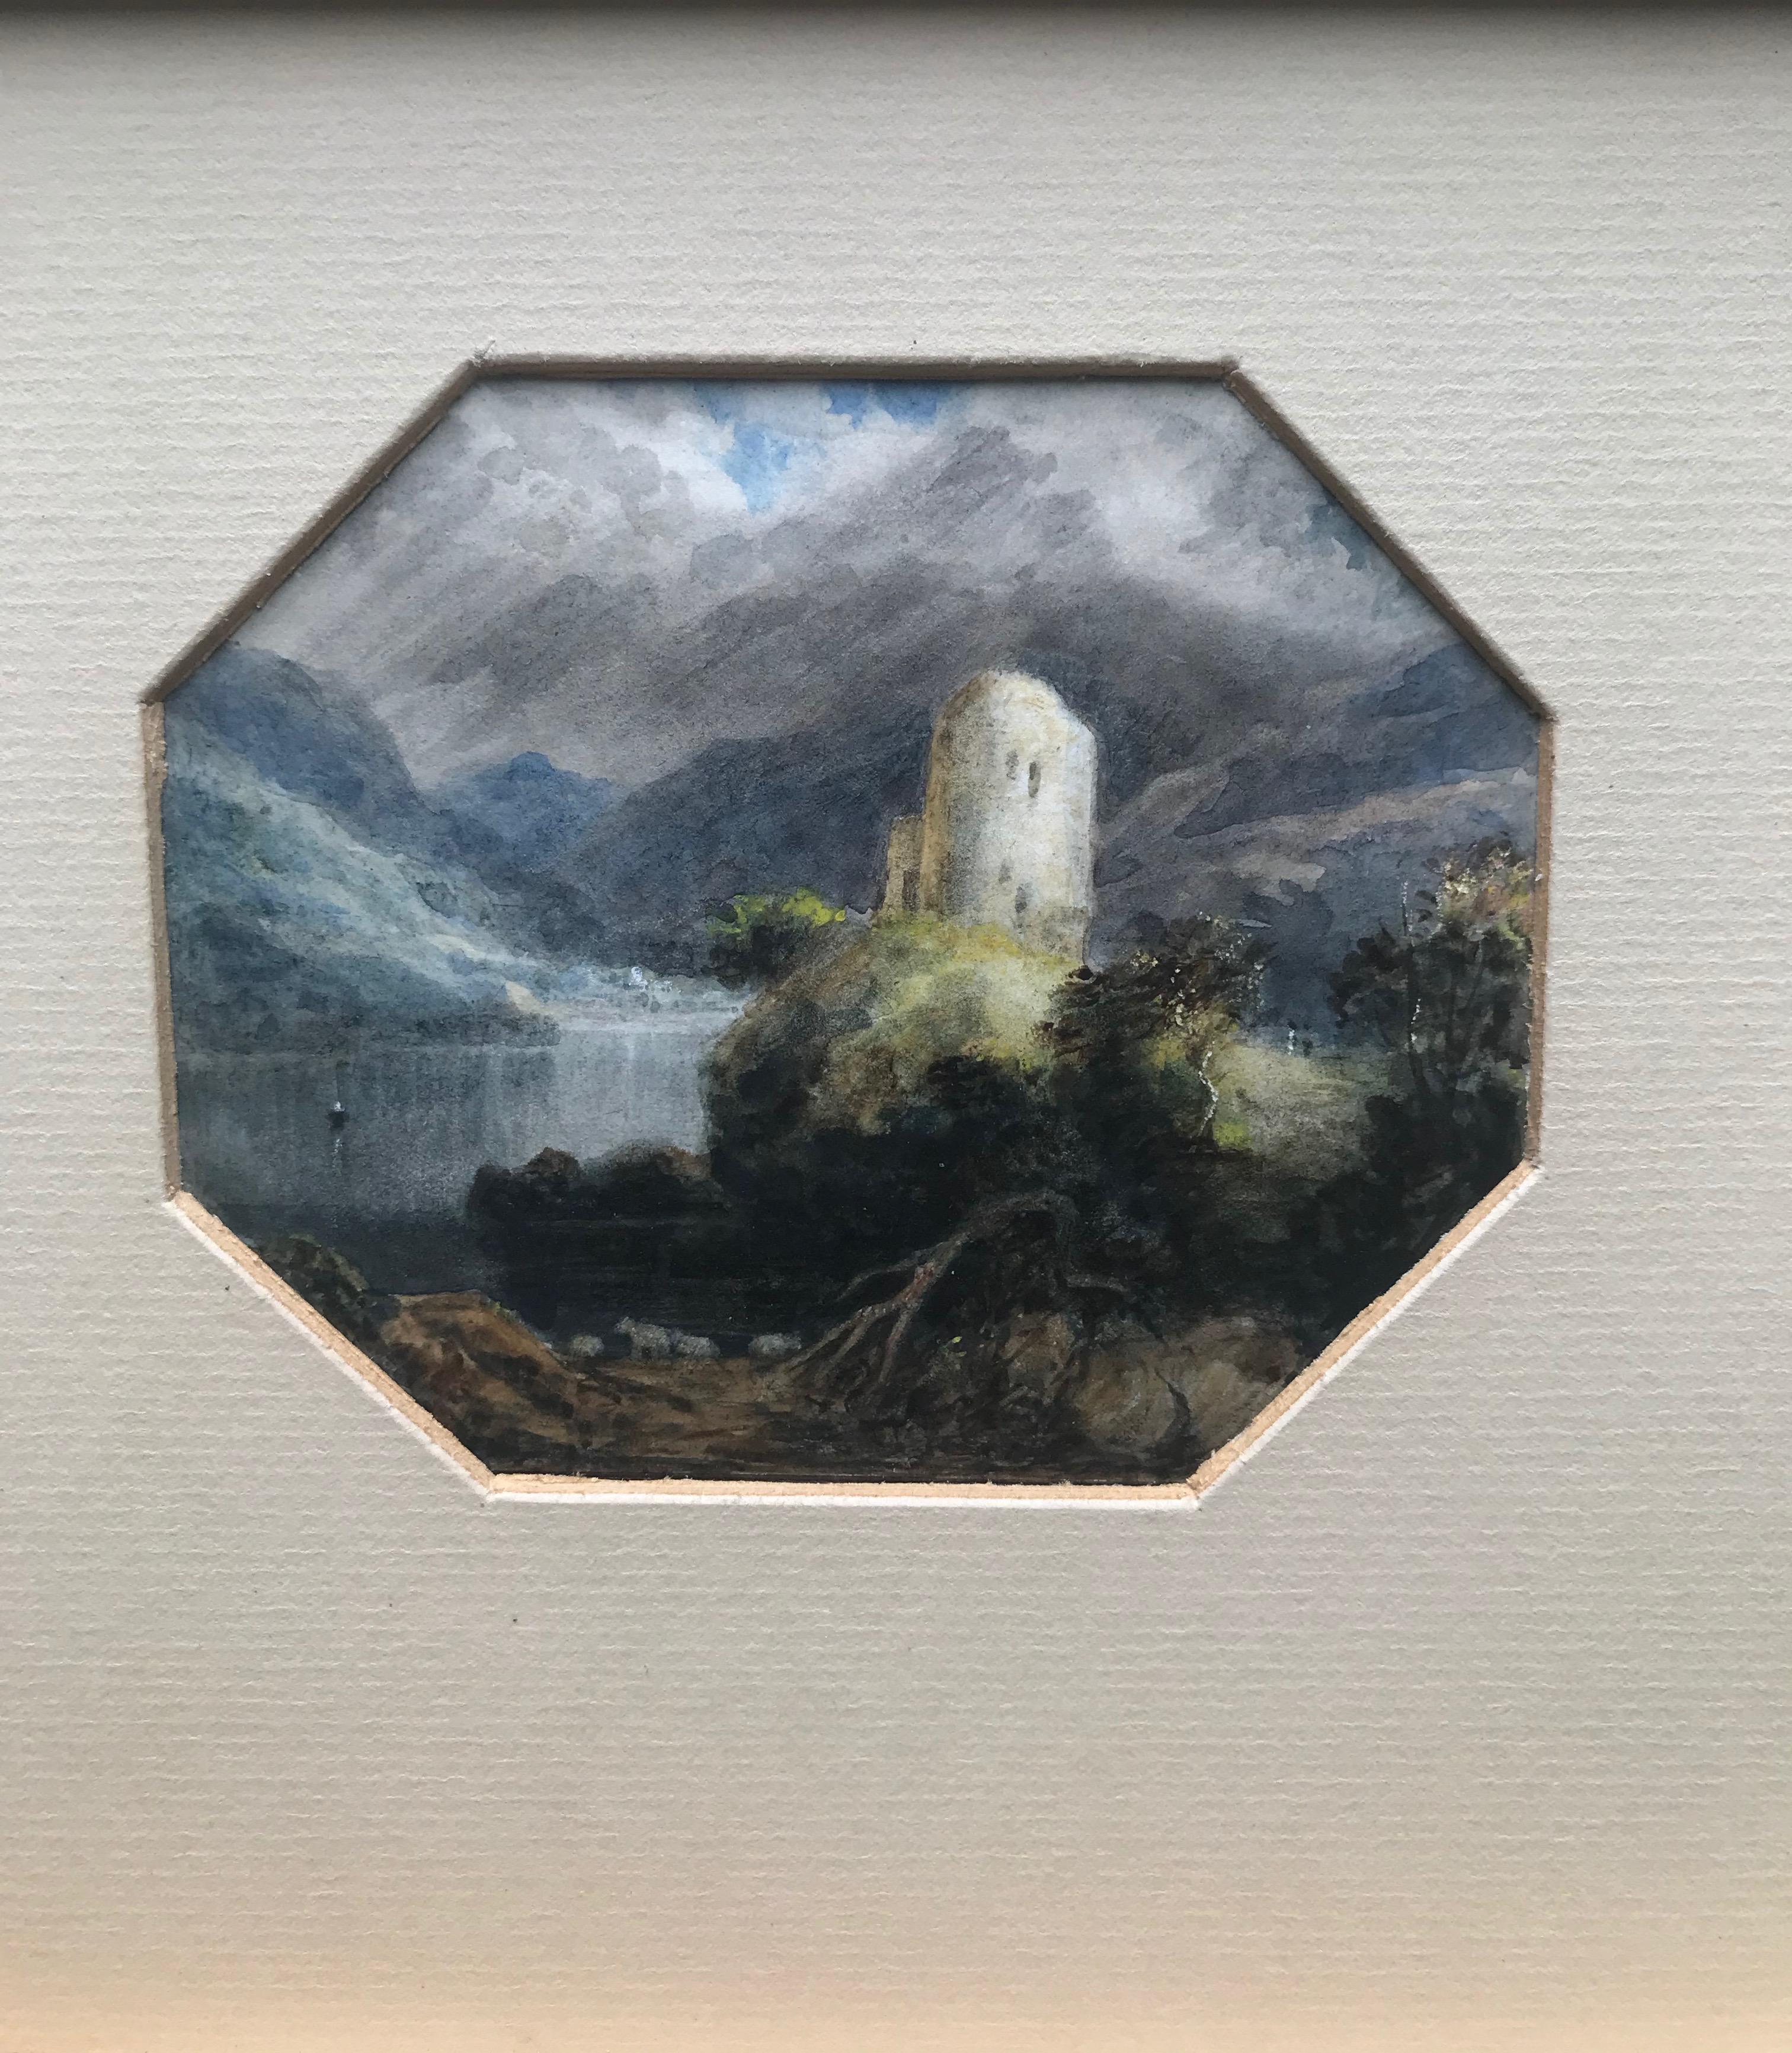 19th Century Romantic watercolor, Follower of JMW Turner, The castle on the loch - Gray Landscape Art by (Circle of) Joseph Mallord William Turner